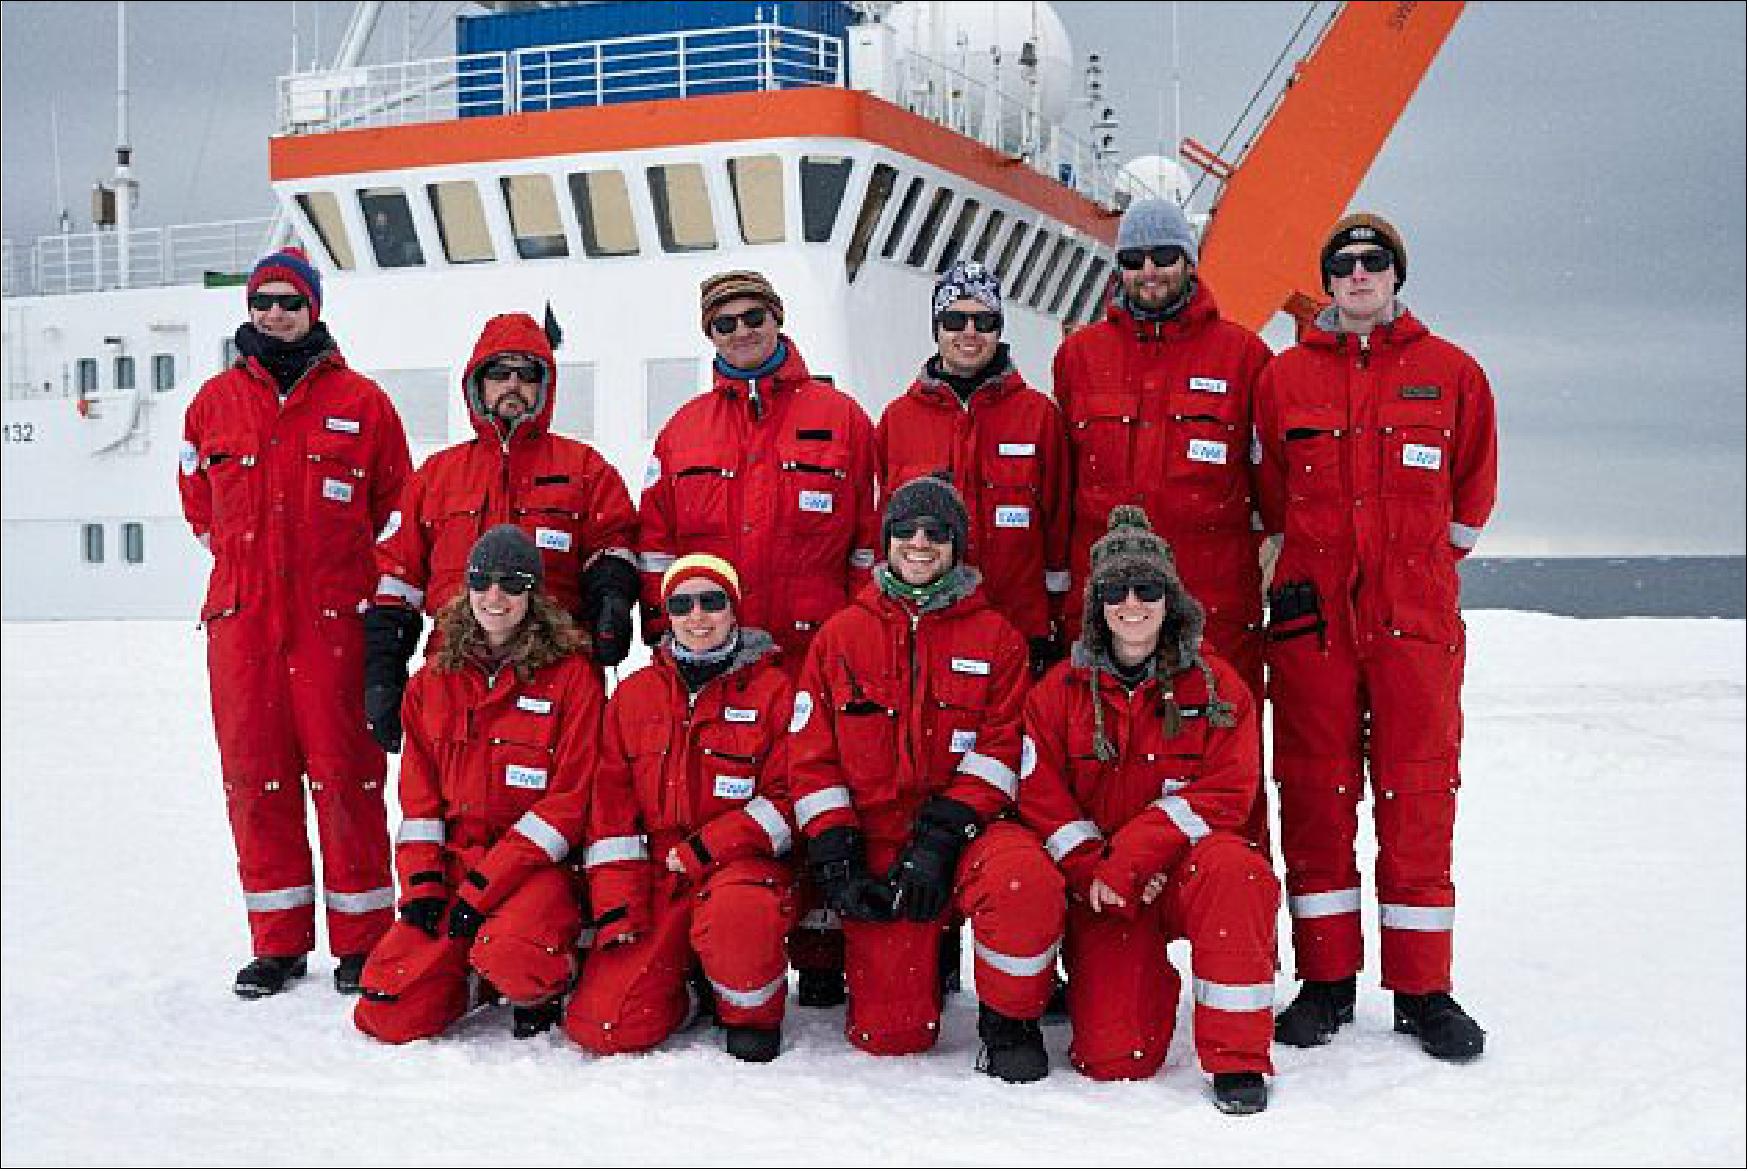 Figure 17: The 2021 overwintering team in front of Polarstern upon arrival in Antarctica. Back row L-R: mechanical engineer Florian Koch, chef Tanguy Doron, station leader and surgeon Peter Jonczyk, meteorologist Paul Ockenfuss, electrical technician Markus Baden, geophysicist Lorenz Marten. Front row L-R: atmospheric chemist Linda Ort, IT and radio specialist Theresa Thoma, geophysicist Timo Dornhoefer, agronomist/astrobotanist Jess Bunchek (image credit: AWI/Tim Heitland)